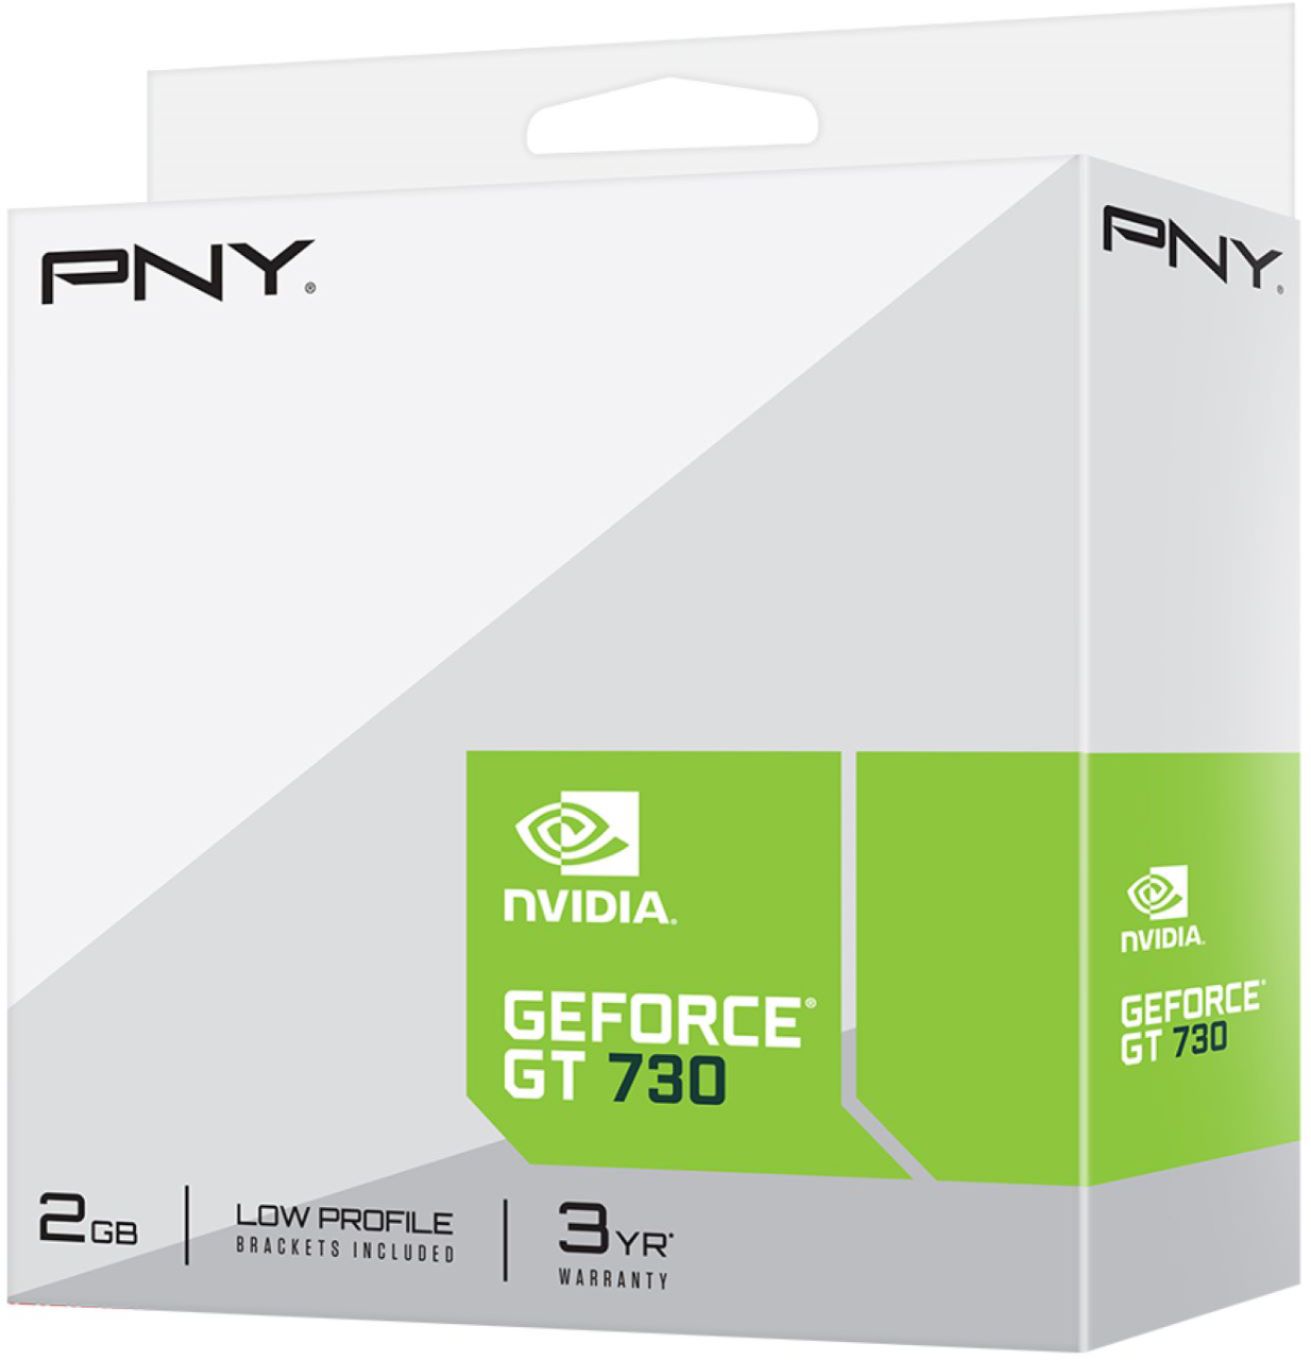 PNY NVIDIA GeForce GT 710 2GB PCI Express 2.0 Graphics Card Black  VCGGT7102XPB-BB - Best Buy